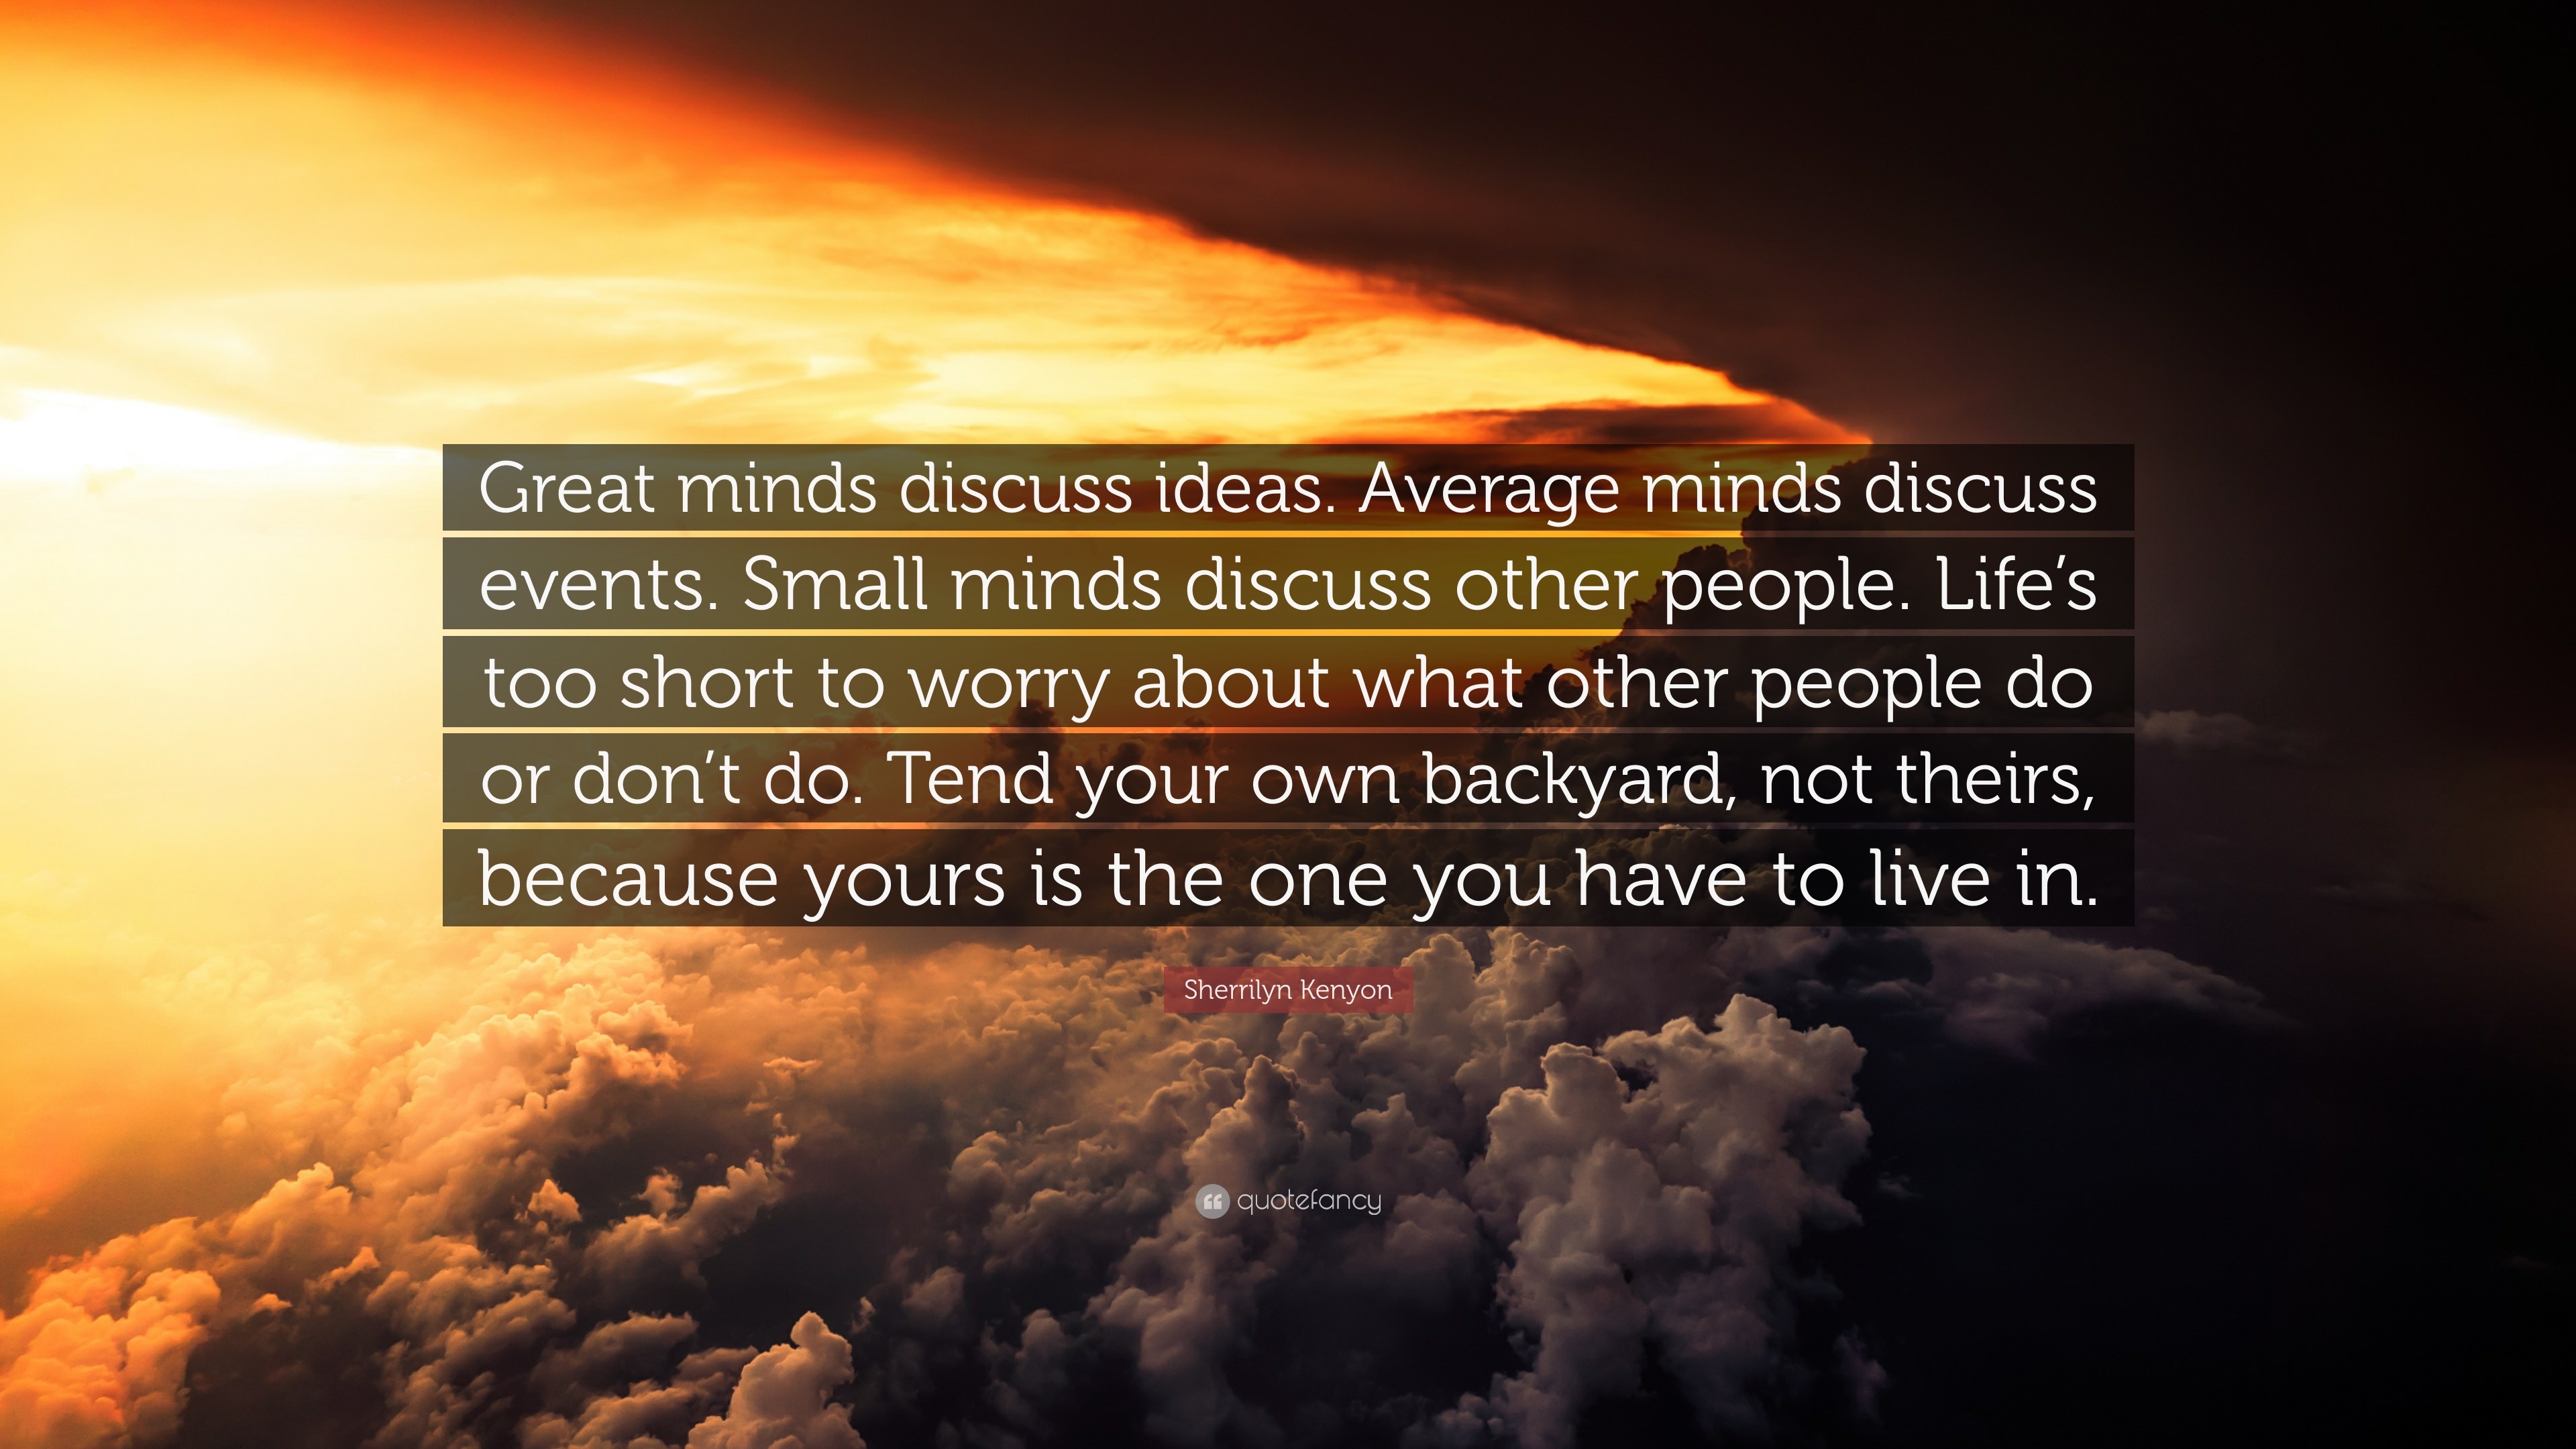 Sherrilyn Kenyon Quote: "Great minds discuss ideas. Average minds discuss events. Small minds ...